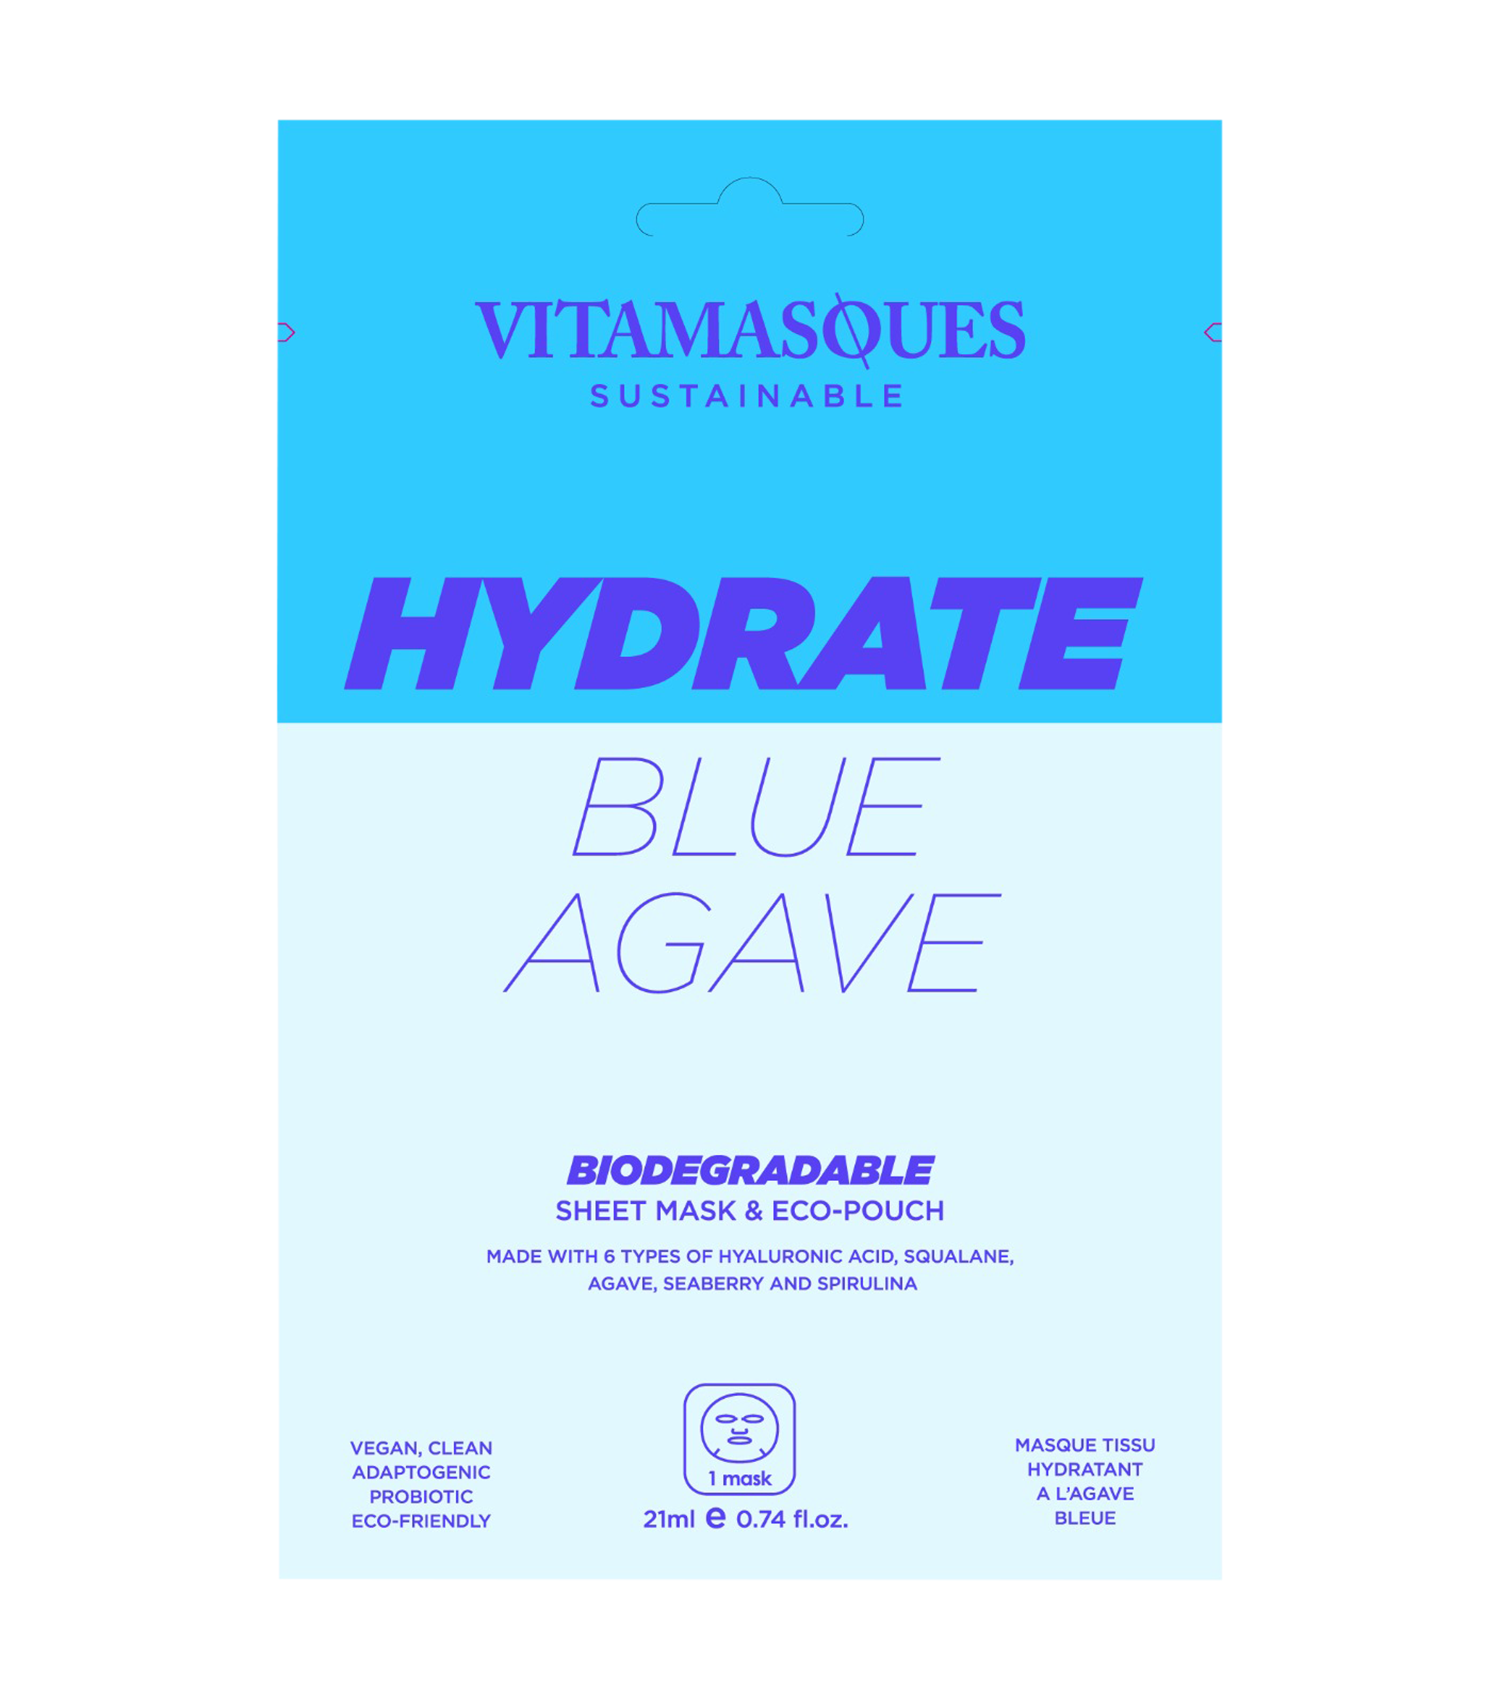 Hydrate Blue Agave Biodegradable Sheet Mask and Eco Pouch